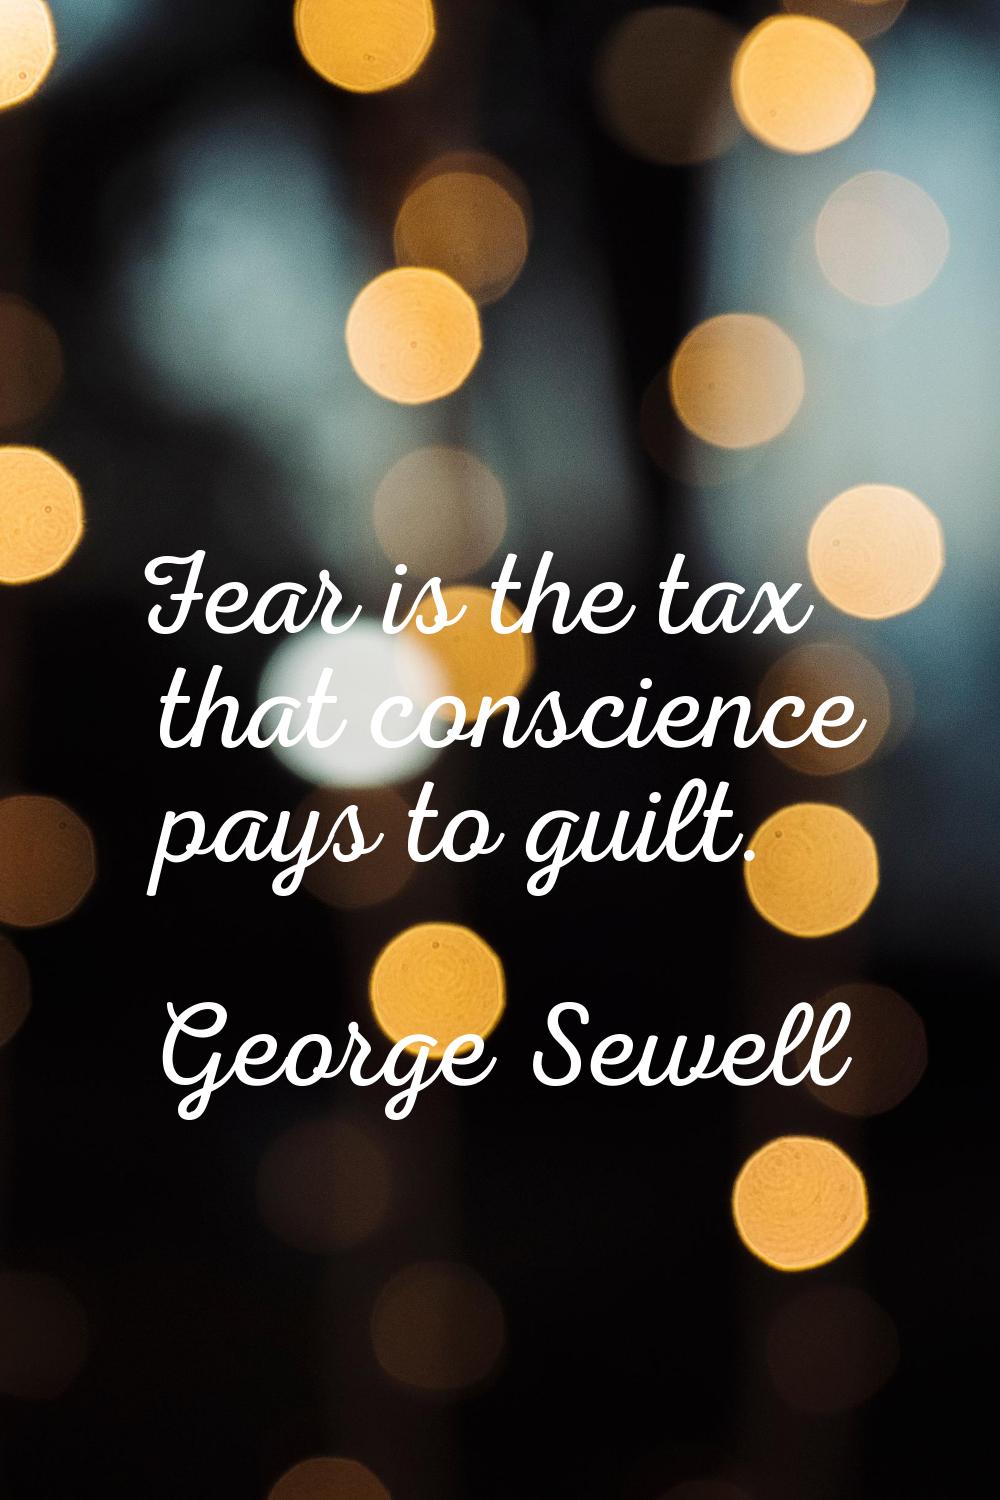 Fear is the tax that conscience pays to guilt.